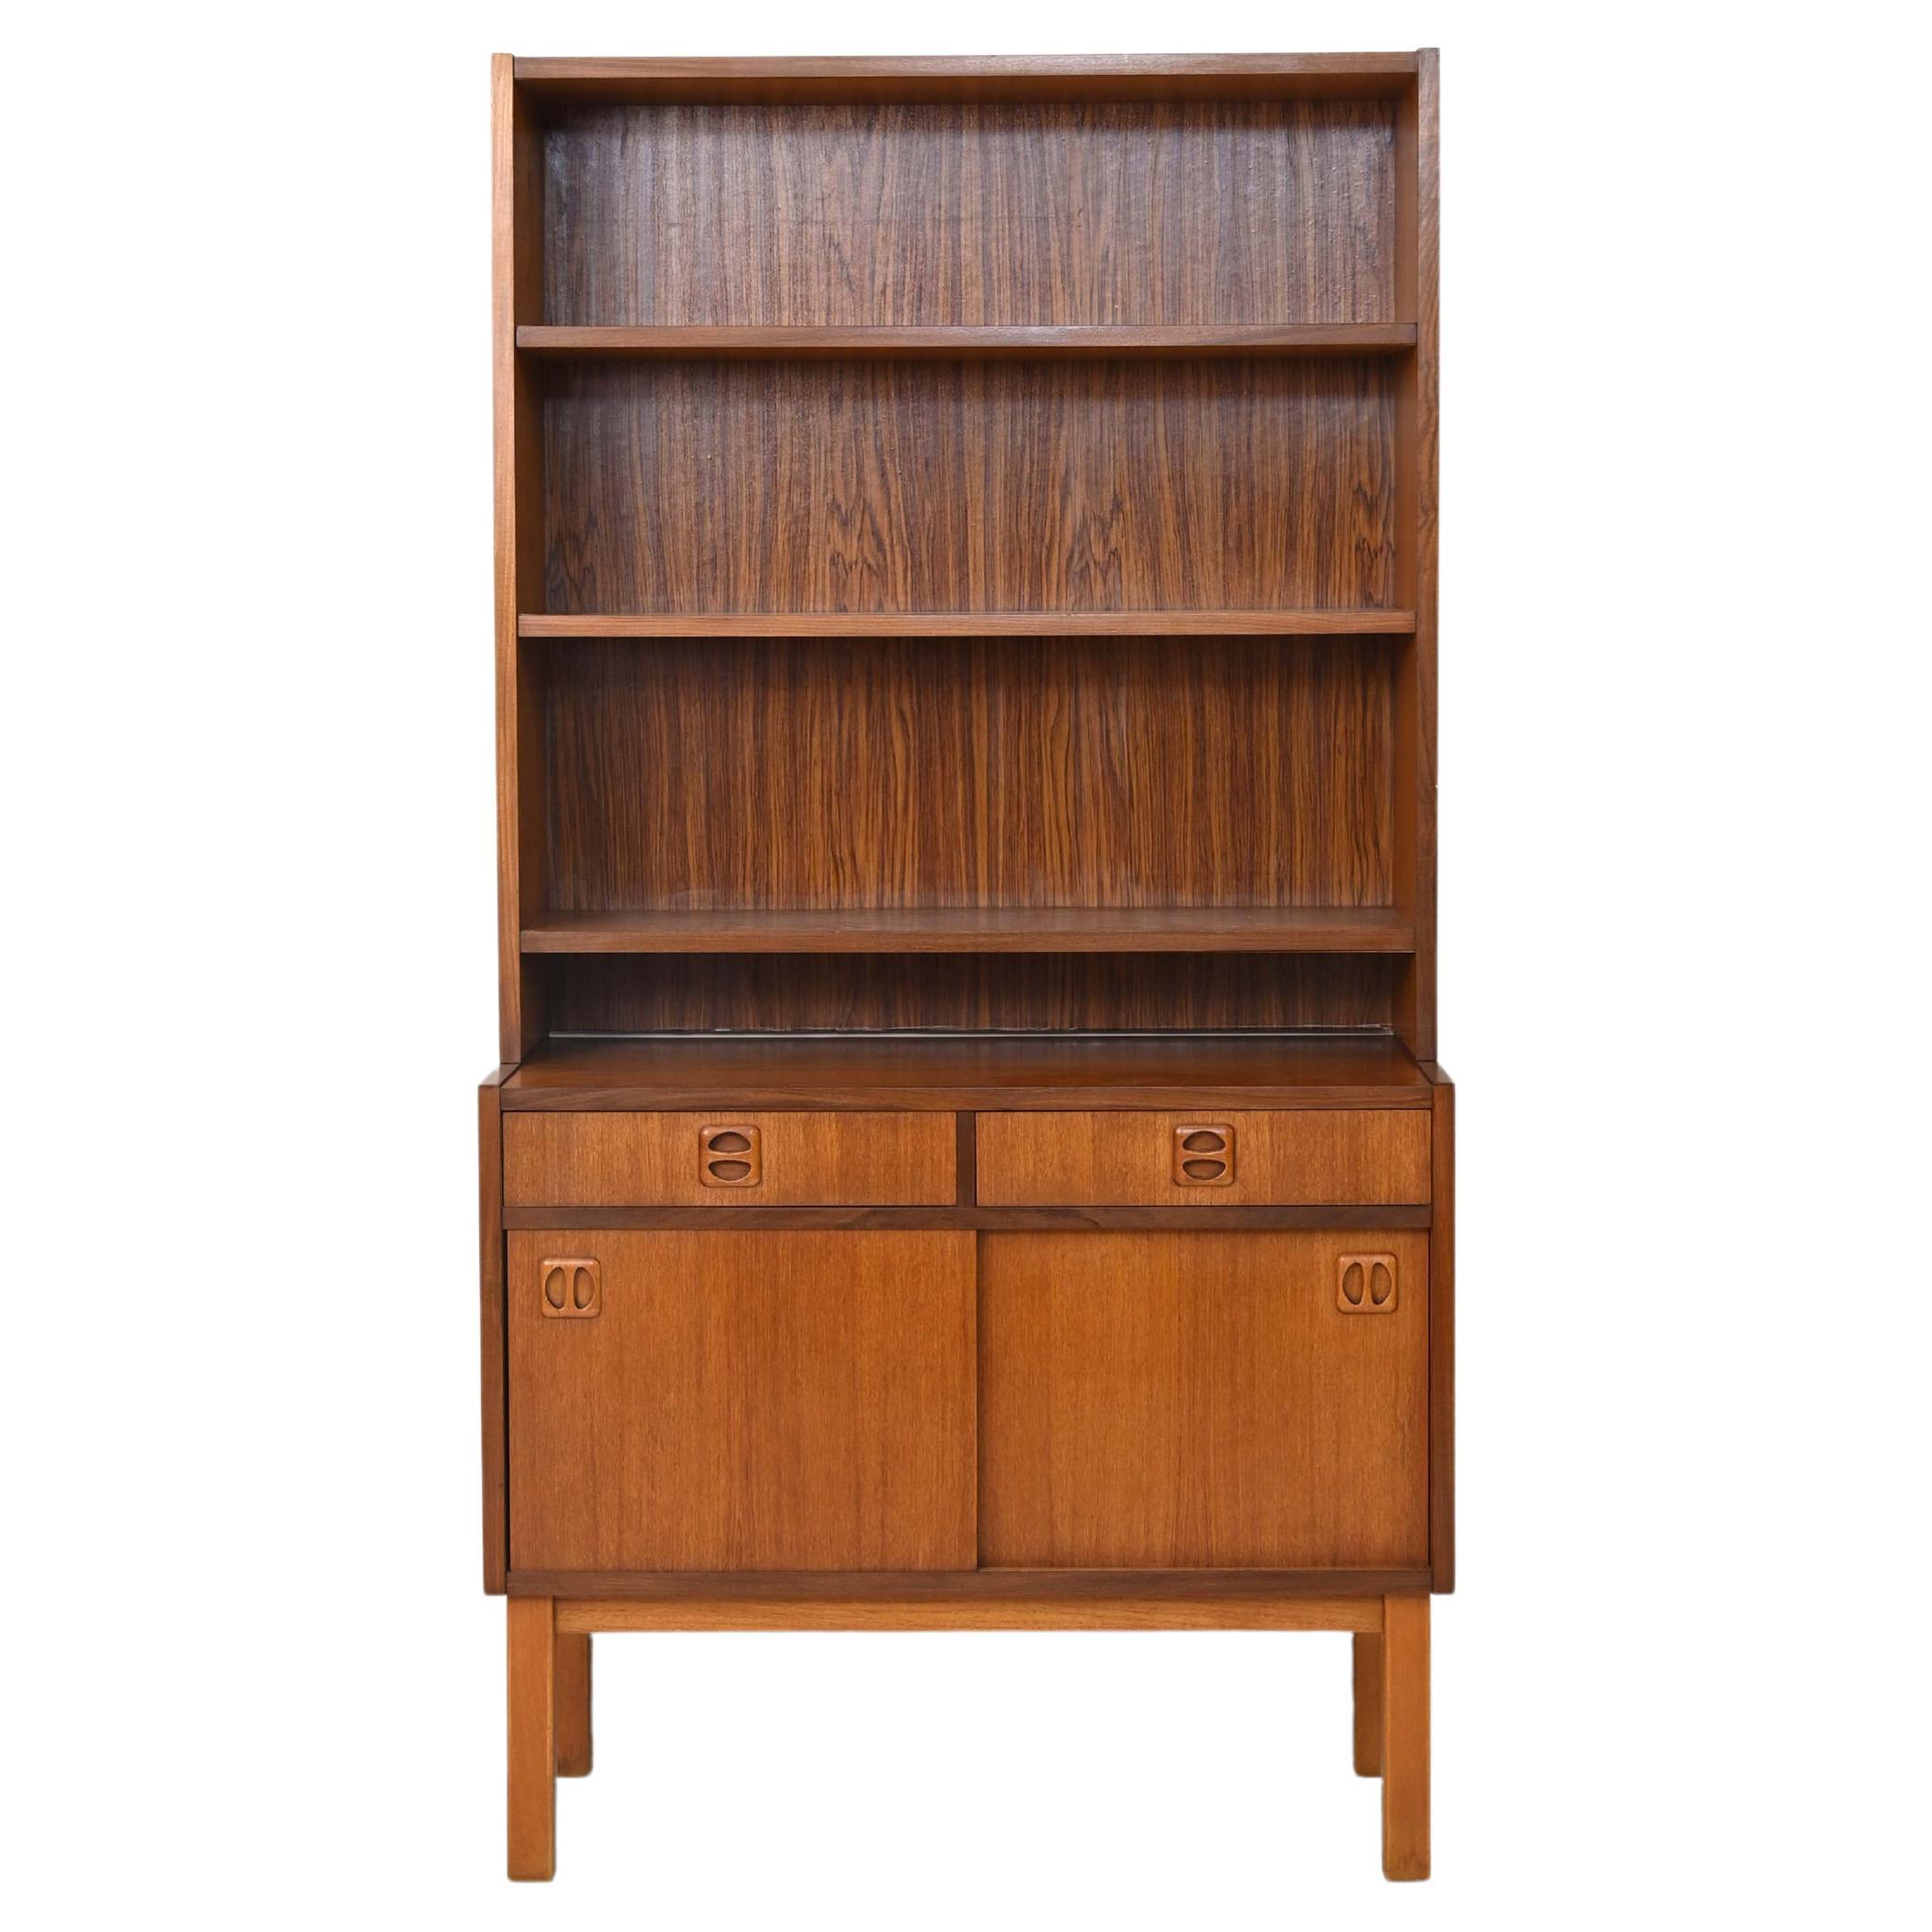 Vintage 1960s Bookcase with Drawers and Sliding Doors